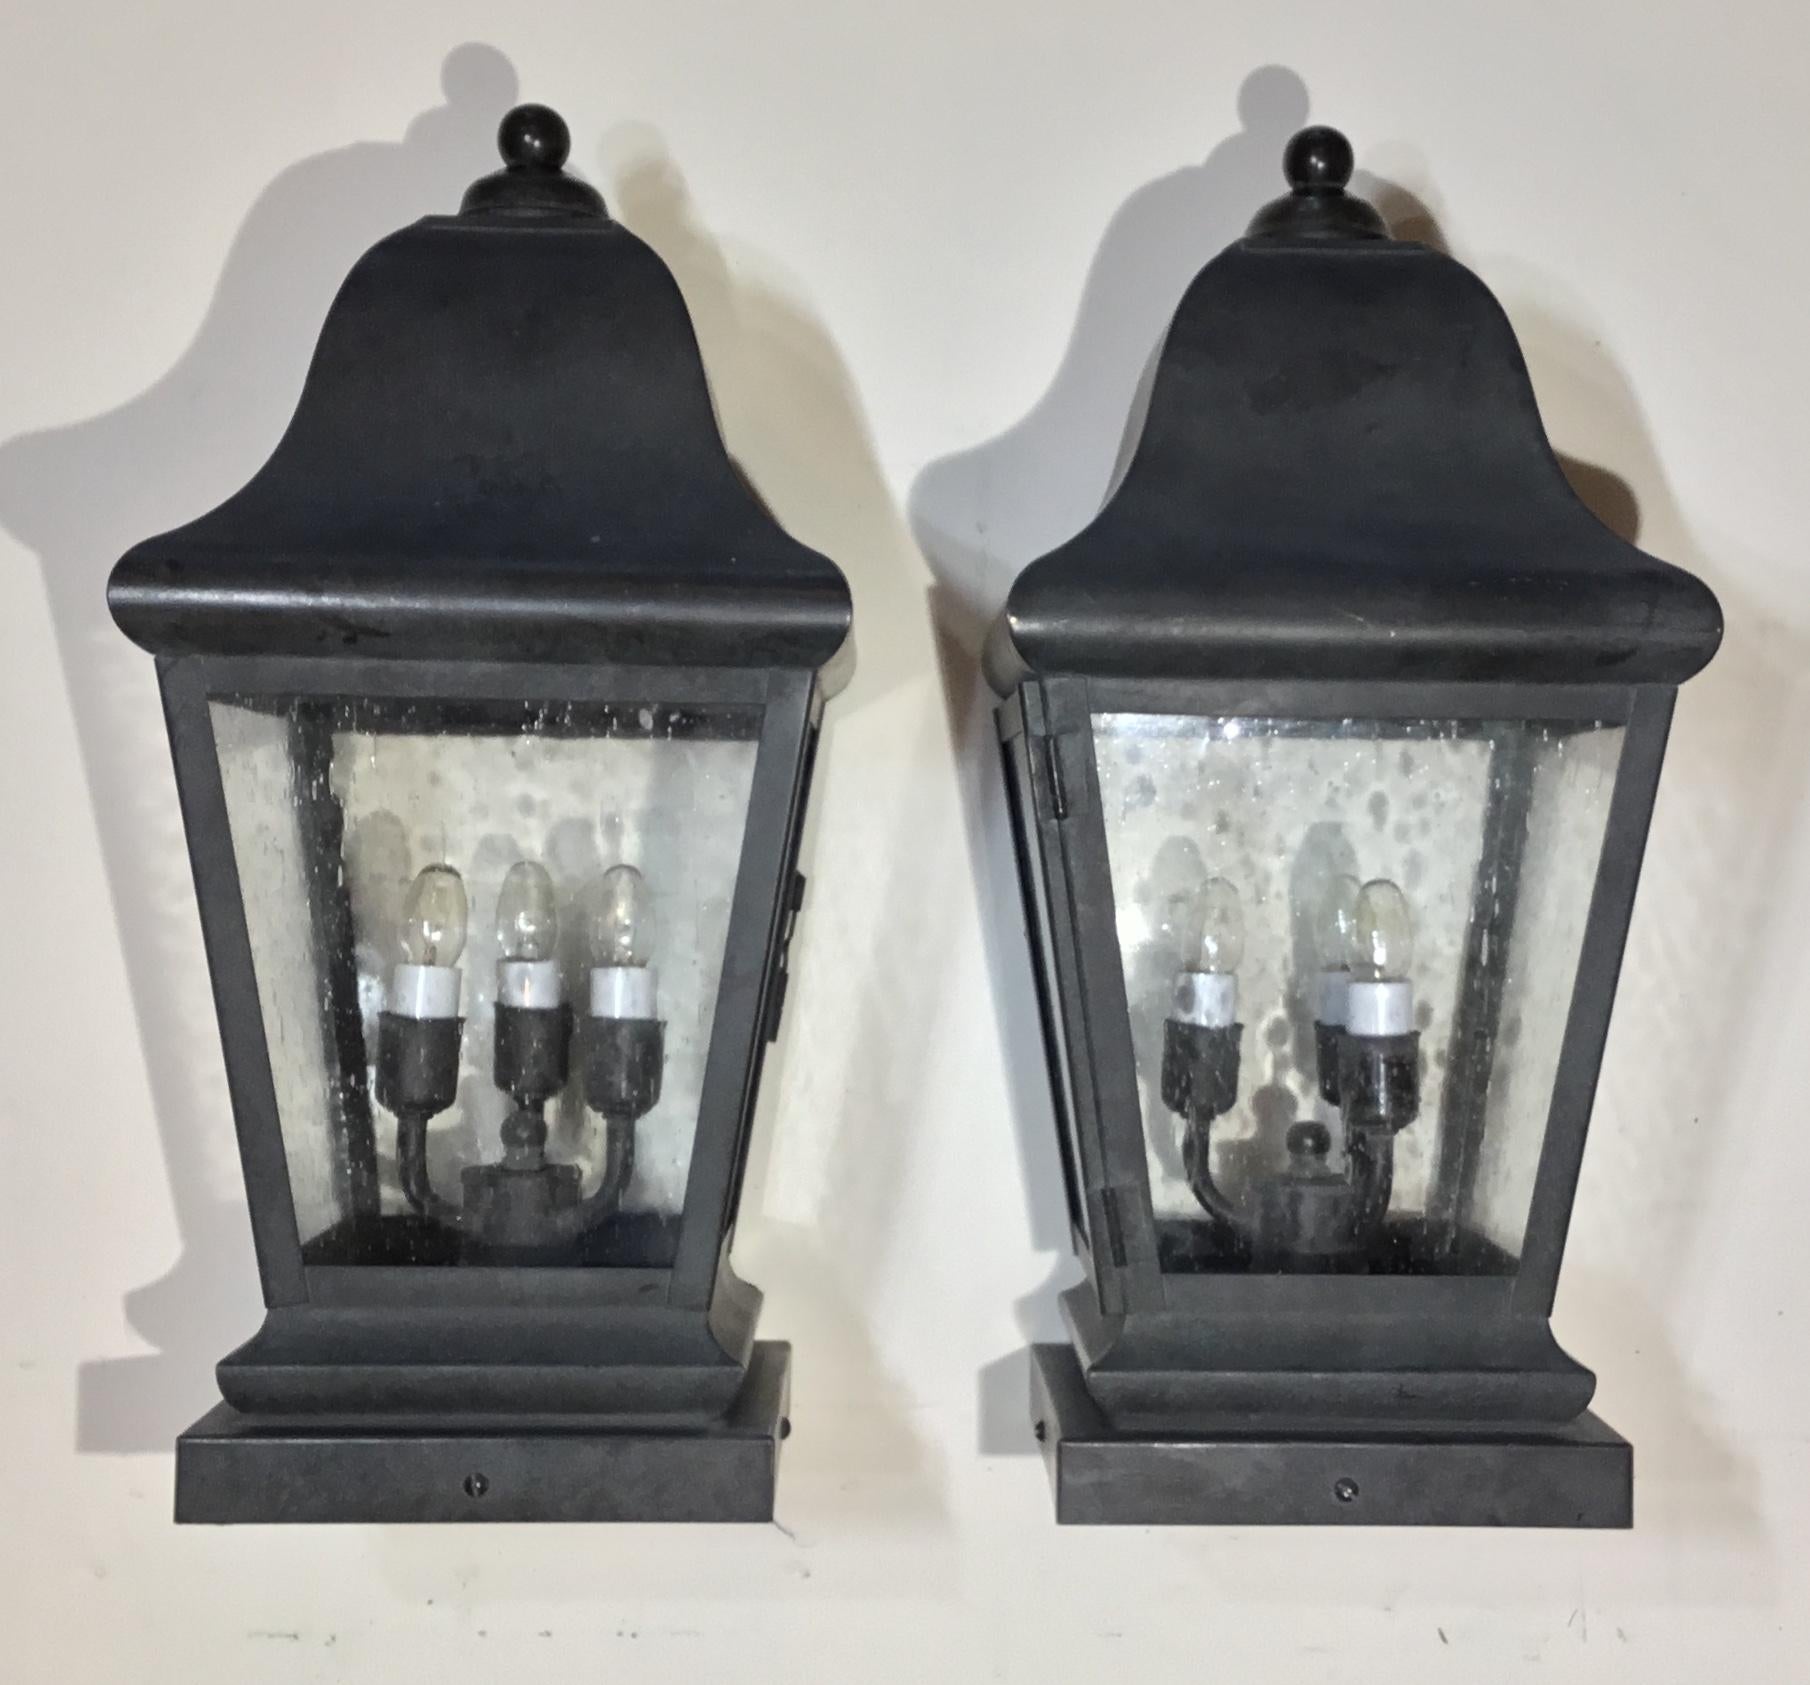 Pair of decorative post lantern handcrafted from solid brass, seeded glass ,with three 40/watt lights each ,suitable for wet locations ,up to US code ,UL approved. Very easy installation.
Base size: 7”x7”.